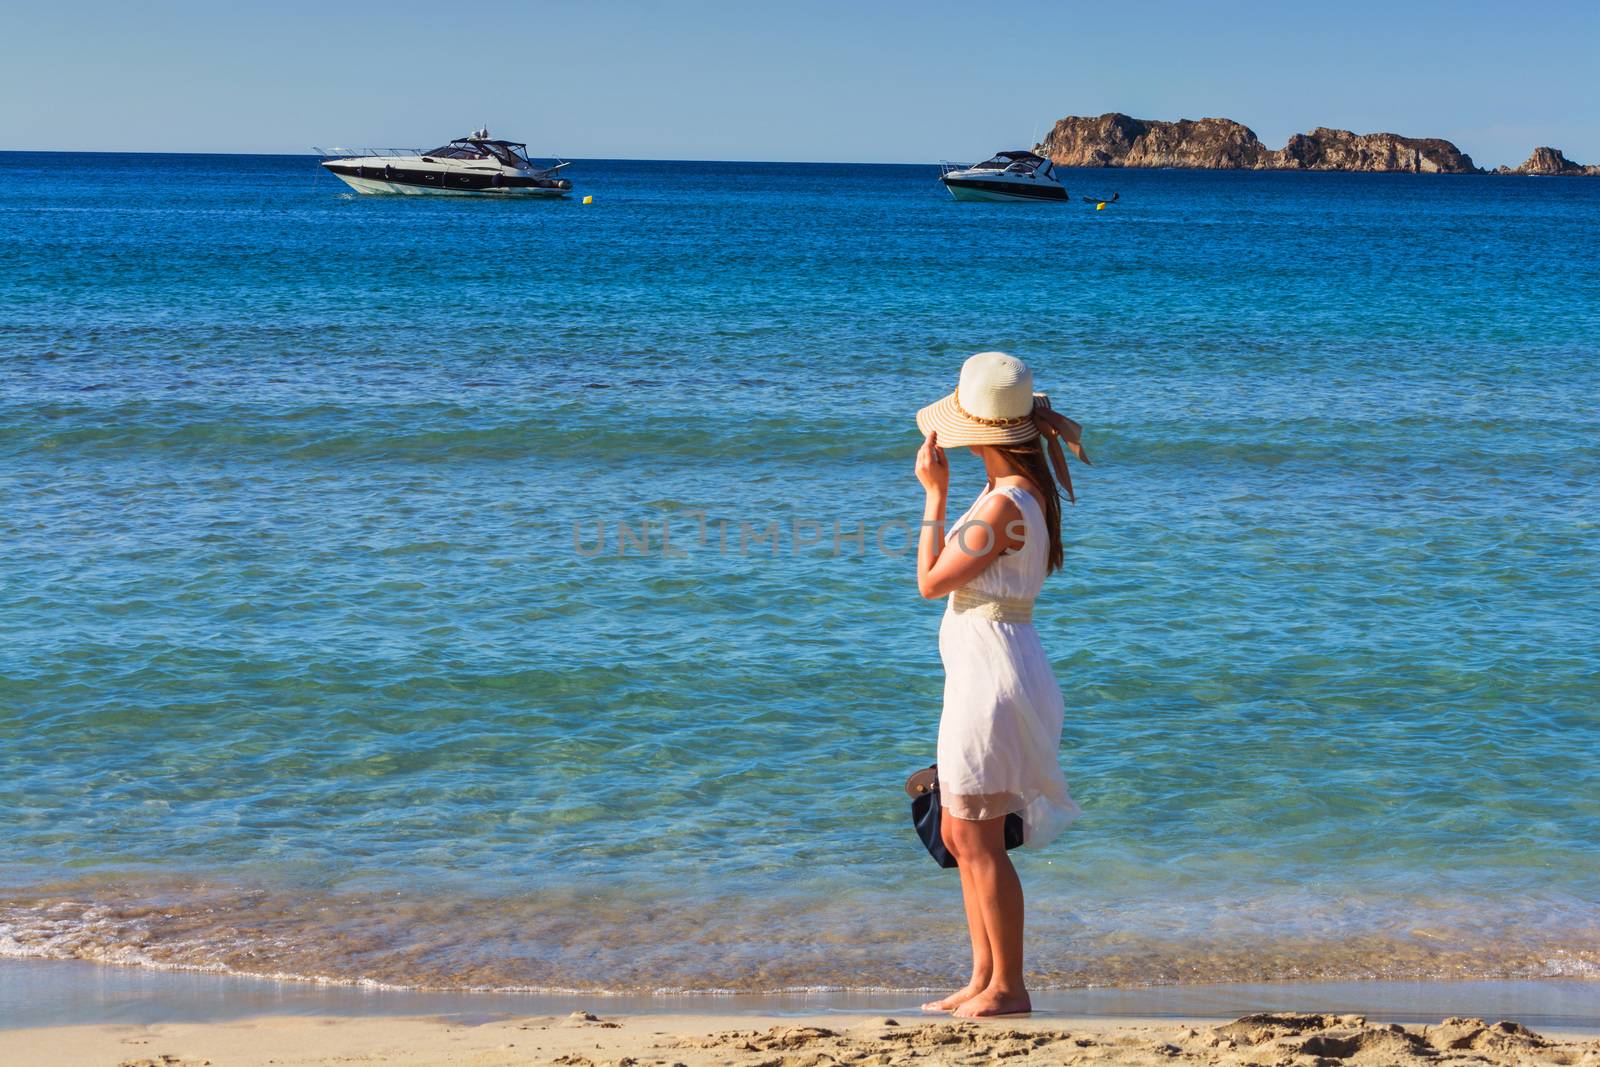 Young trendy woman relax on the beach. Happy island lifestyle. Holiday in paradise. In Hindergrund beach blue sky, crystal clear sea and two luxury motor yachts.